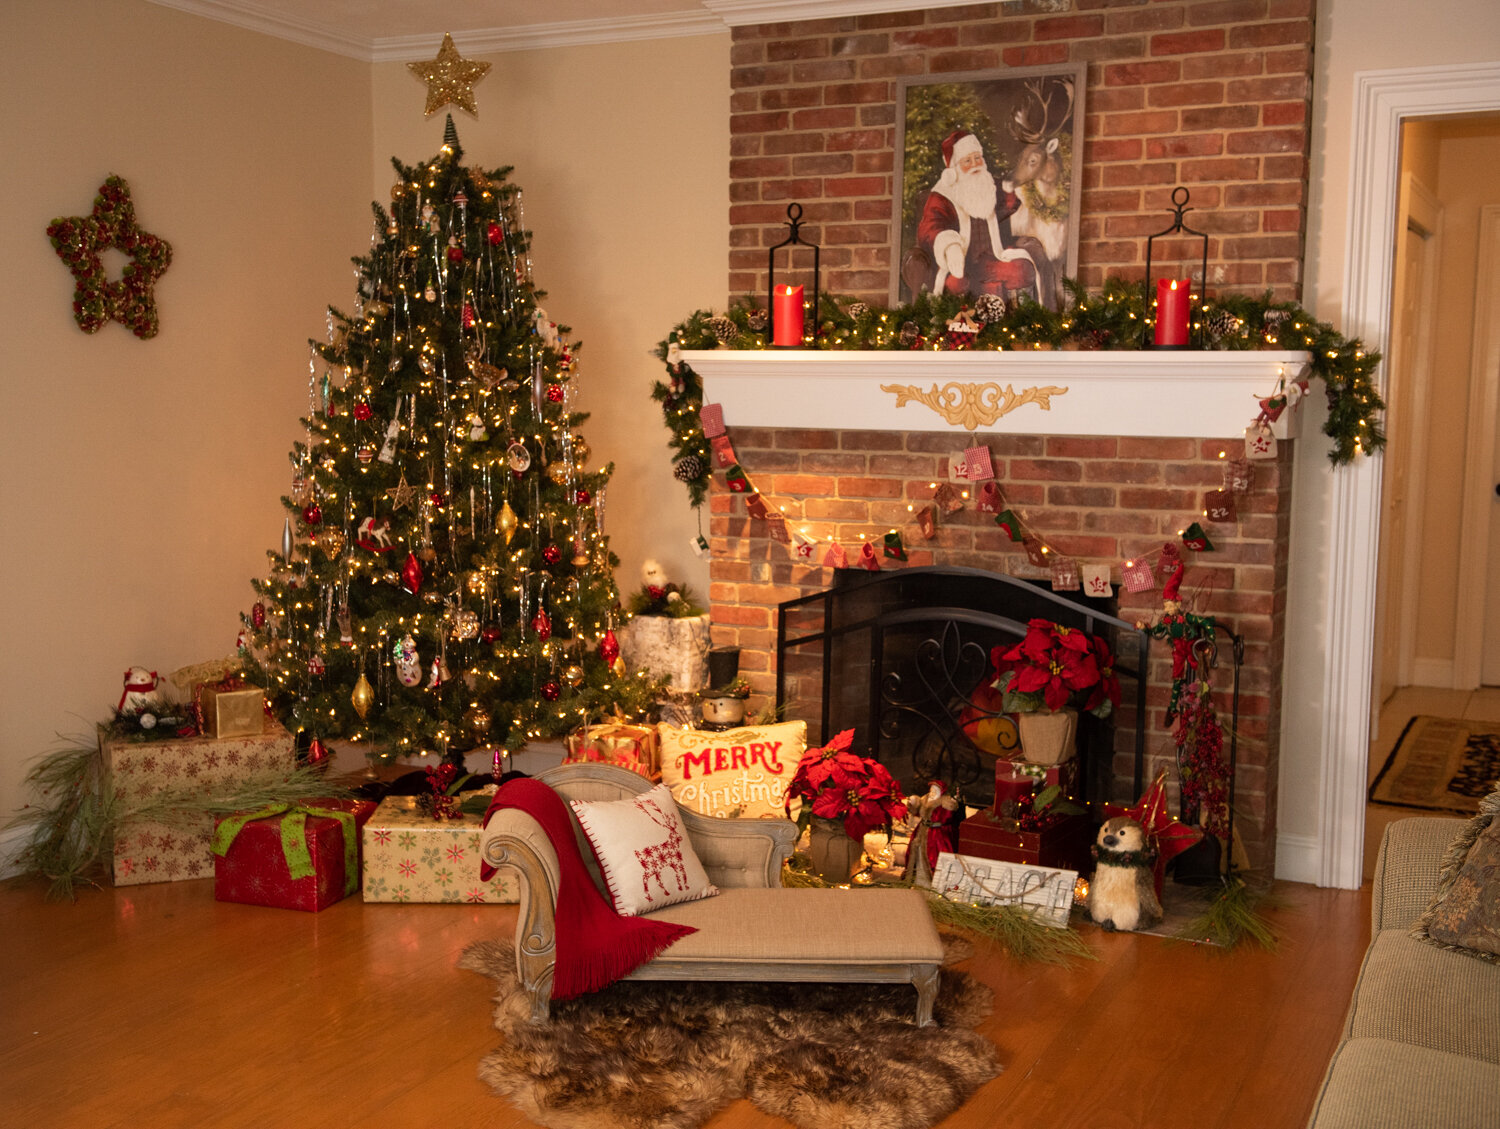 Our Relaxation Room doubles as a holiday set with fireplace for Mini Sessions each November.